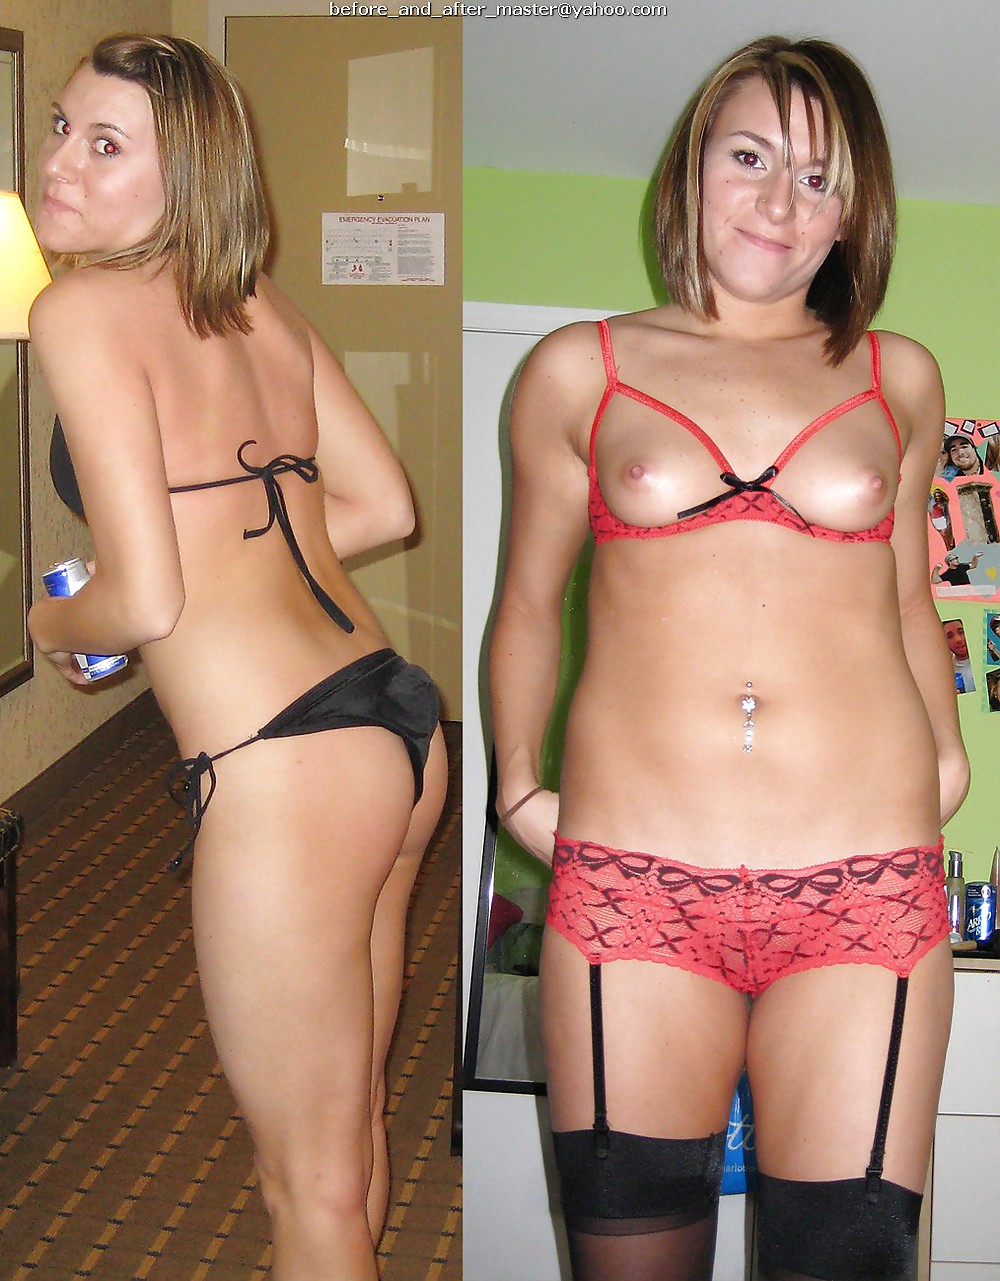 Before and after pics - 21 adult photos